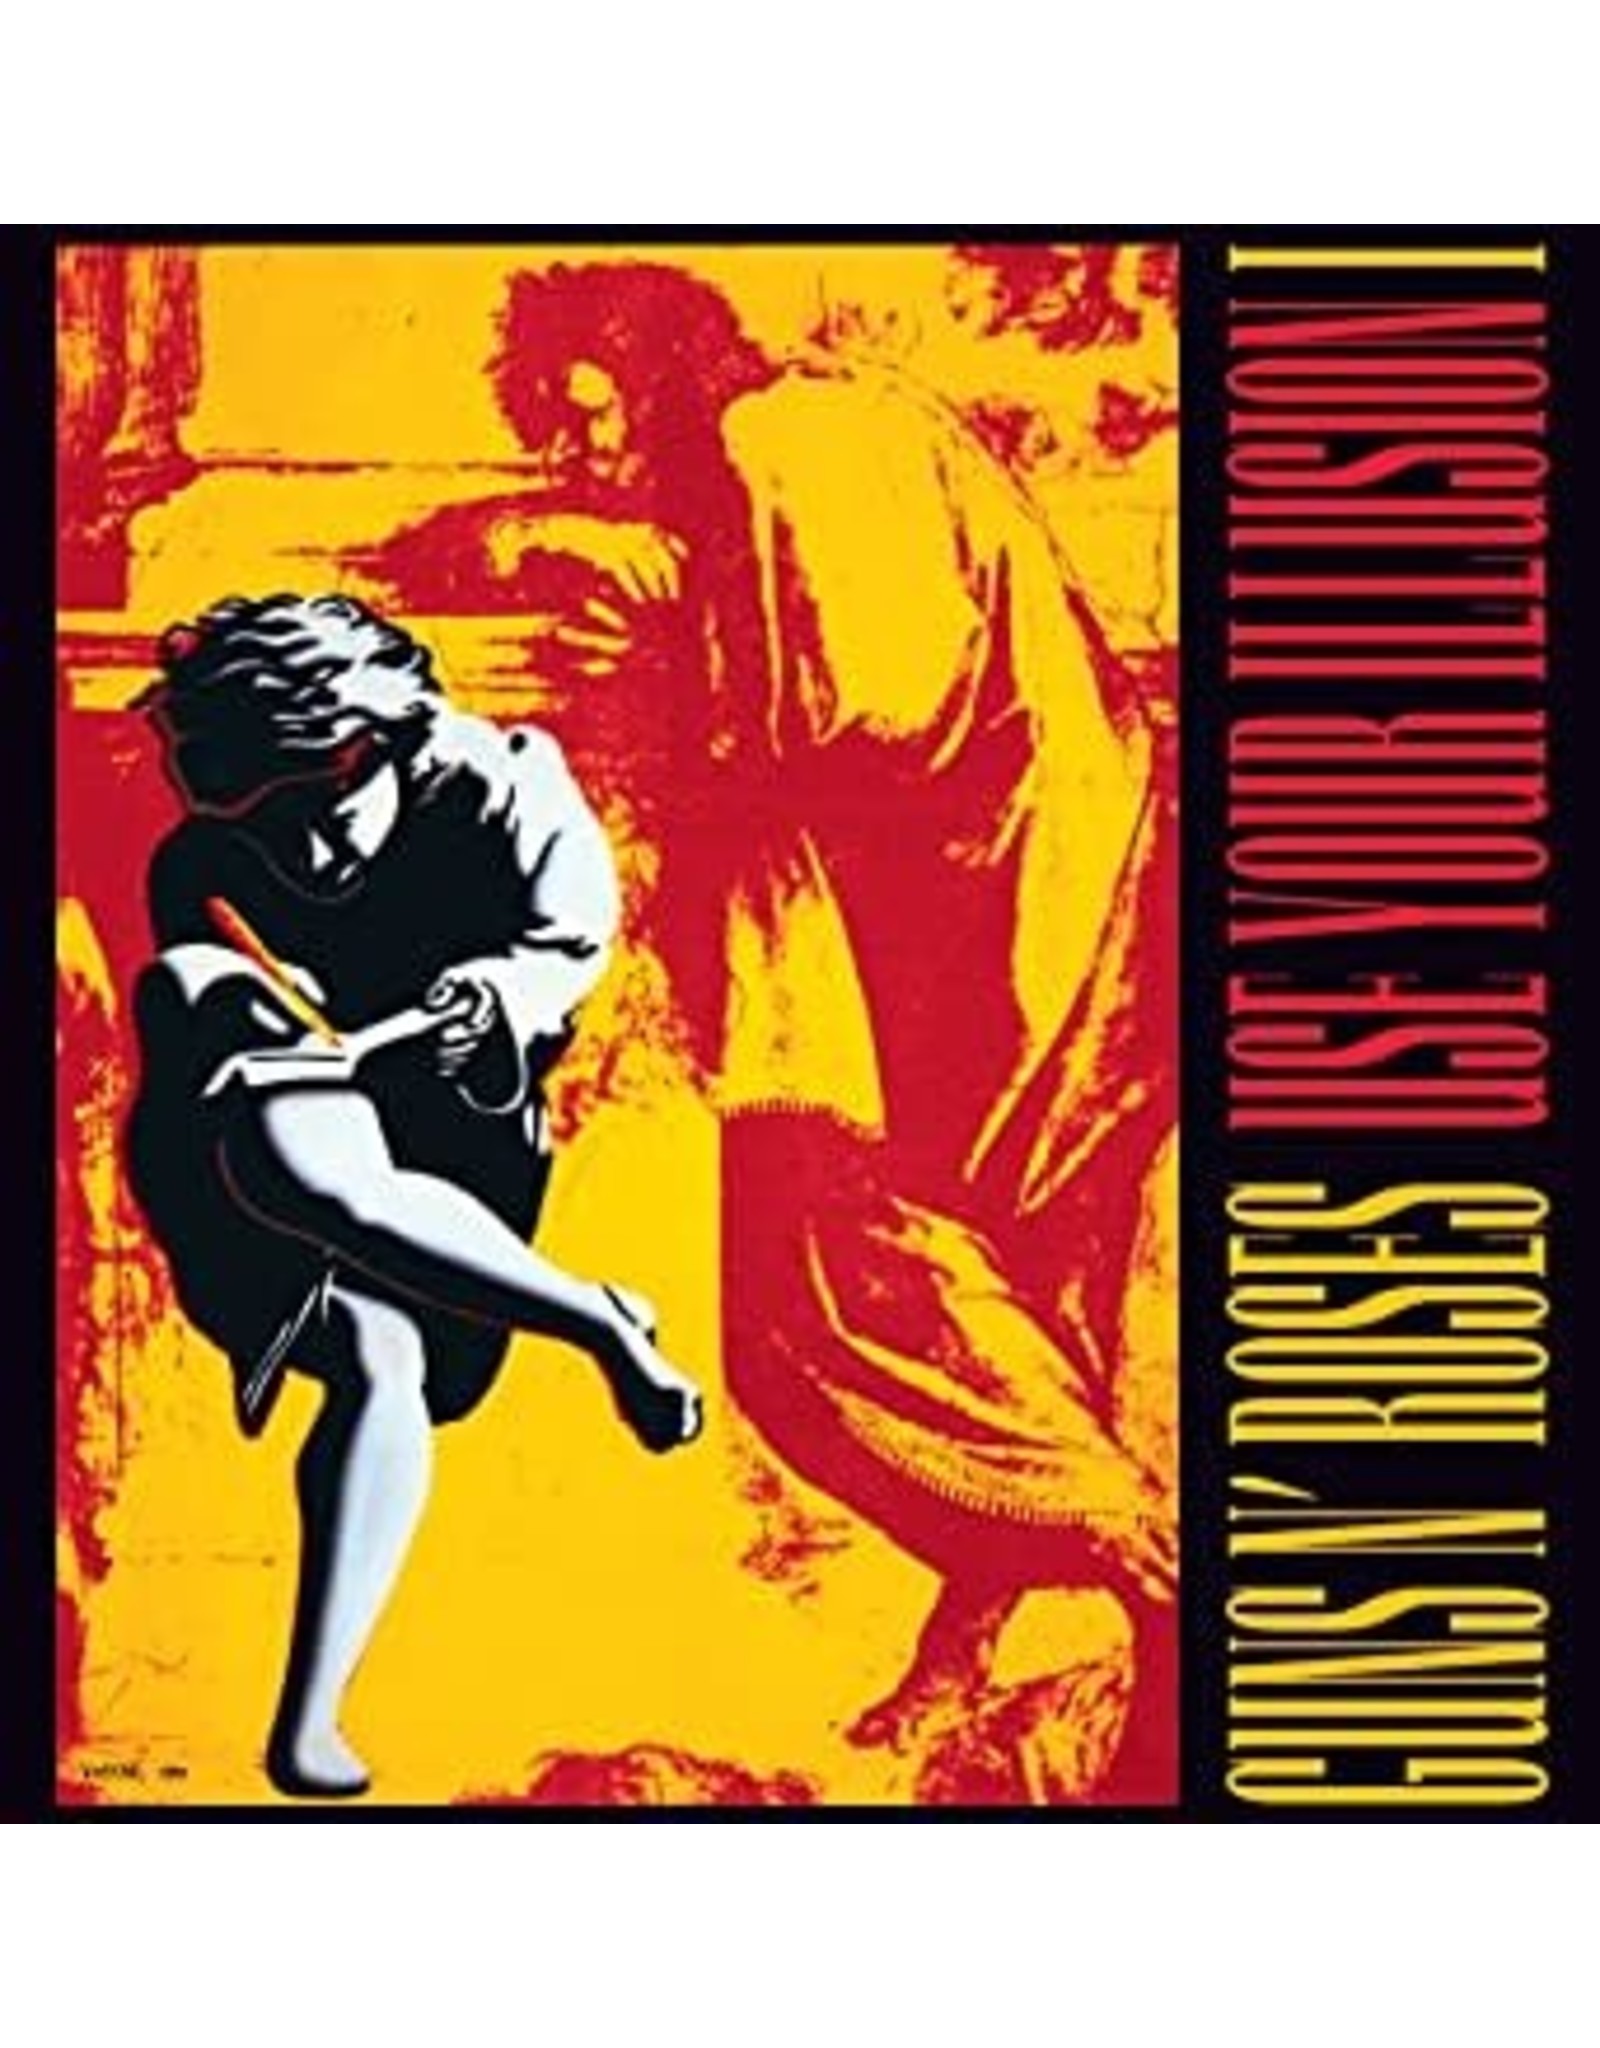 Guns N Roses - Use Your Illusion I (Dlx Edition) (2CD/remaster+13 live tracks)